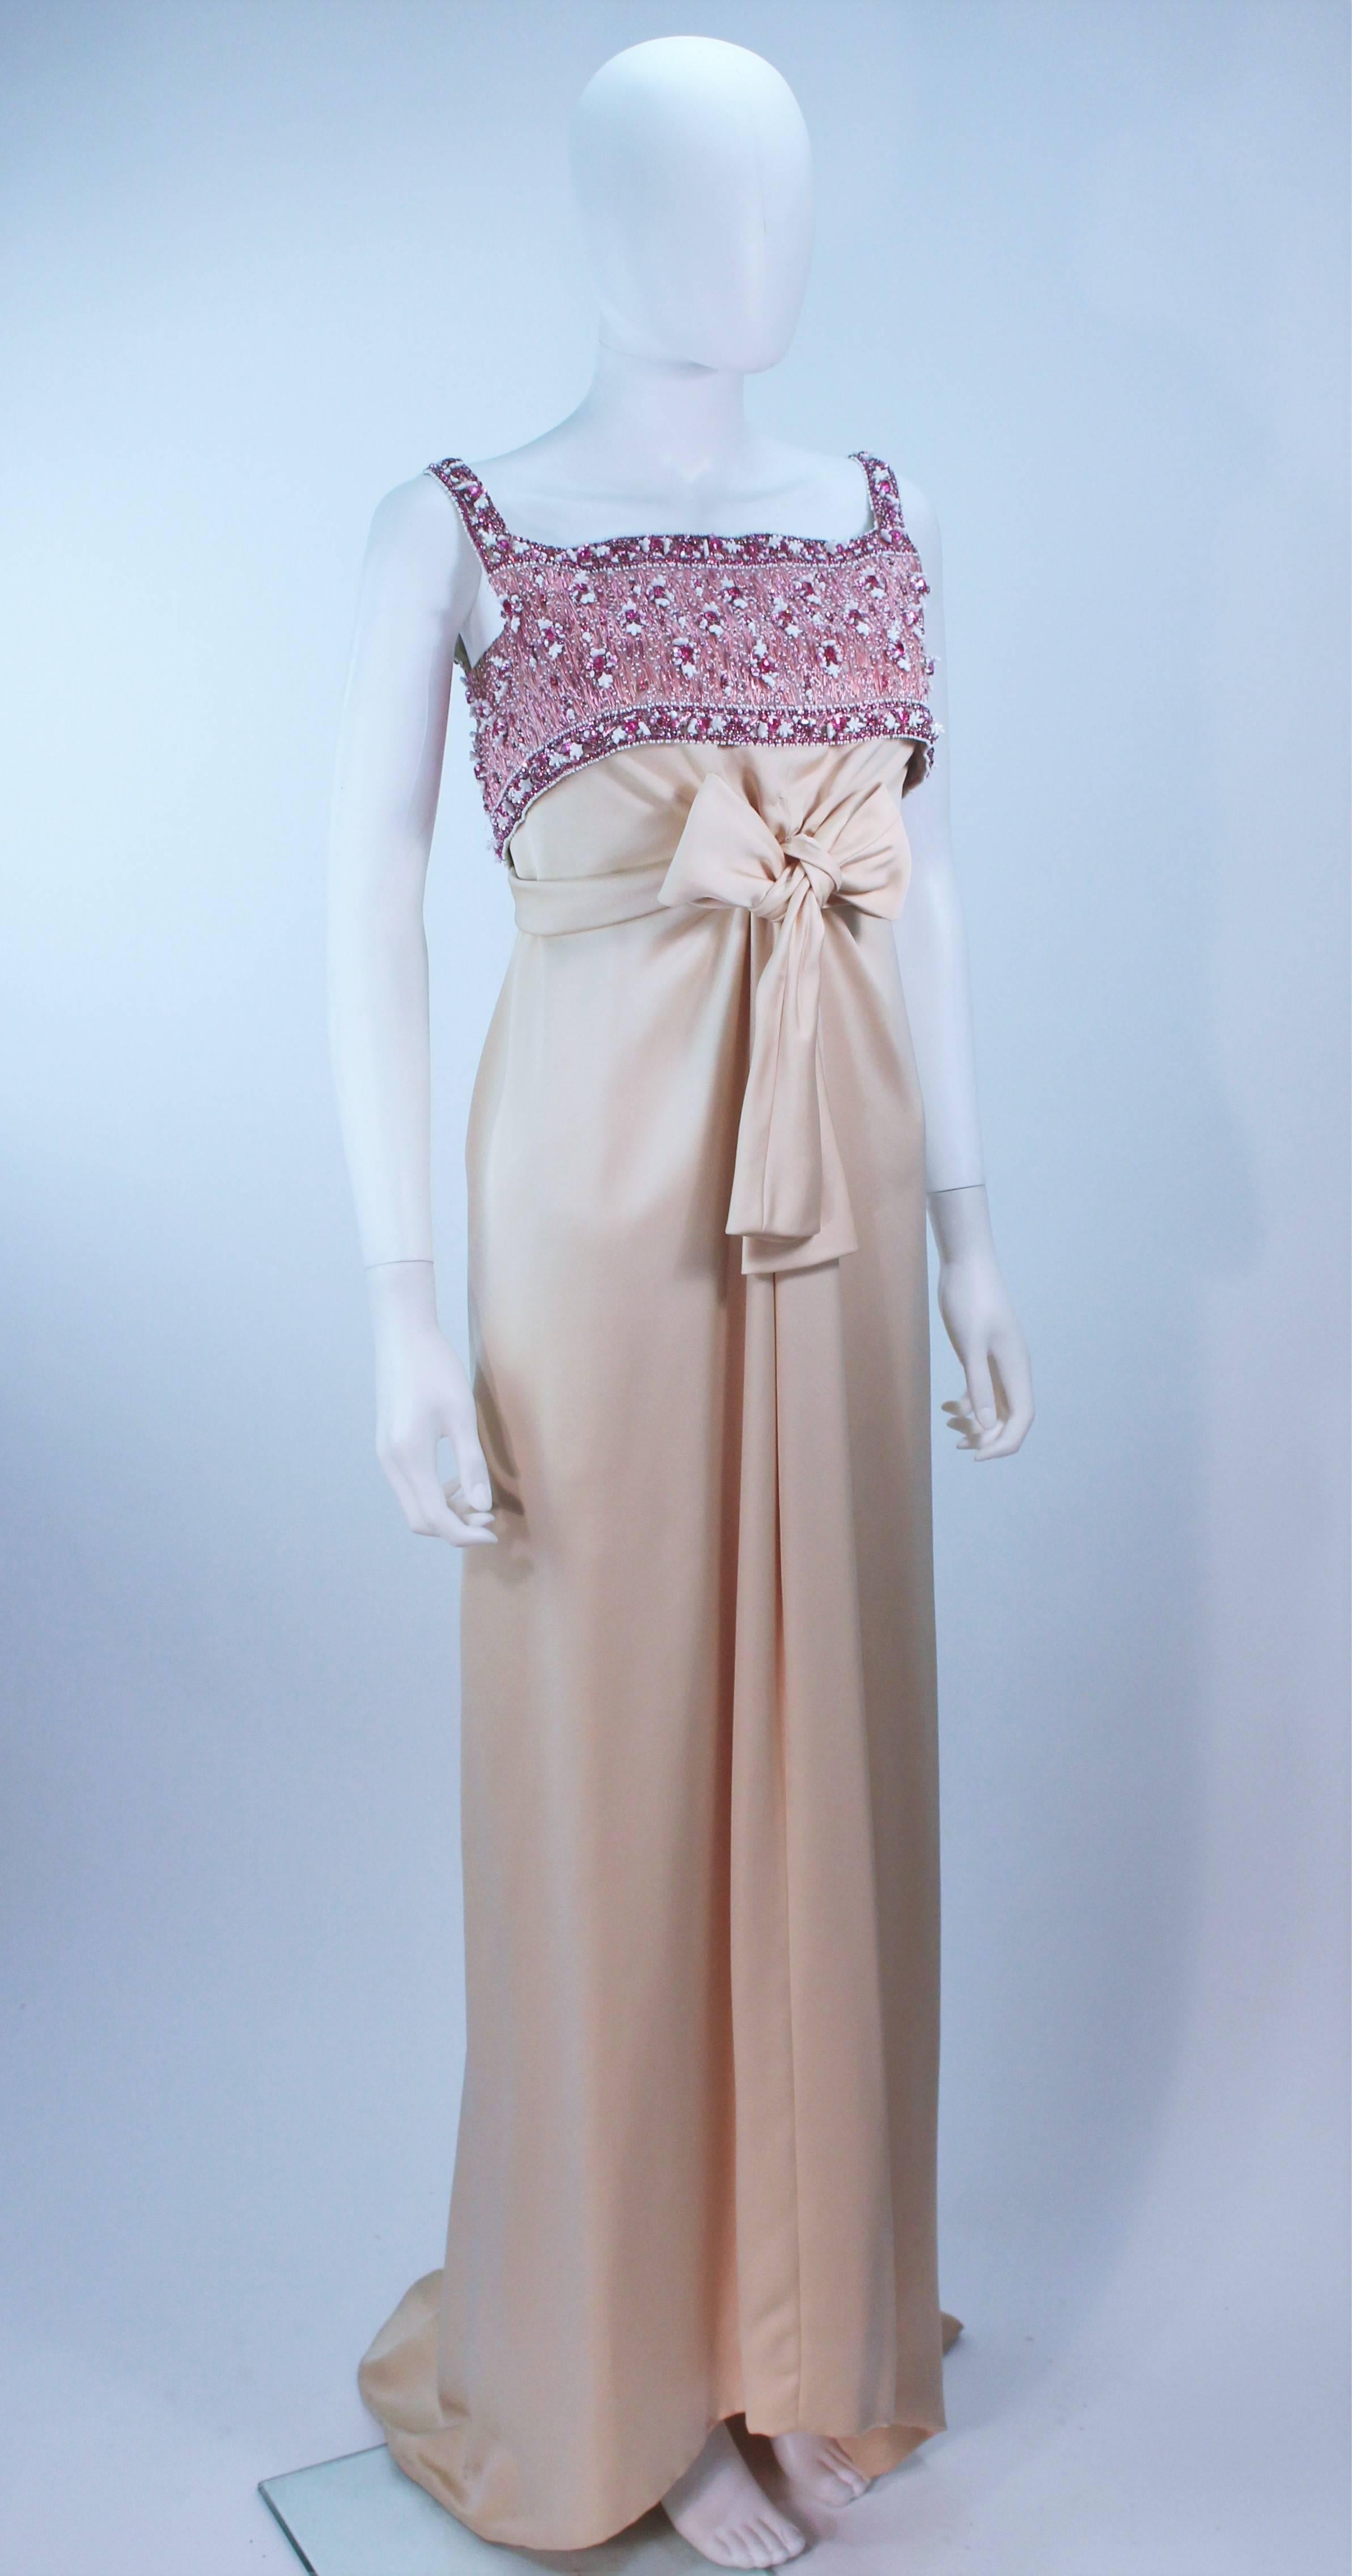 Brown GIVENCHY HAUTE COUTURE Lesage Paris Betsy Bloomingdale Hand Beaded 1960s Gown 0  For Sale